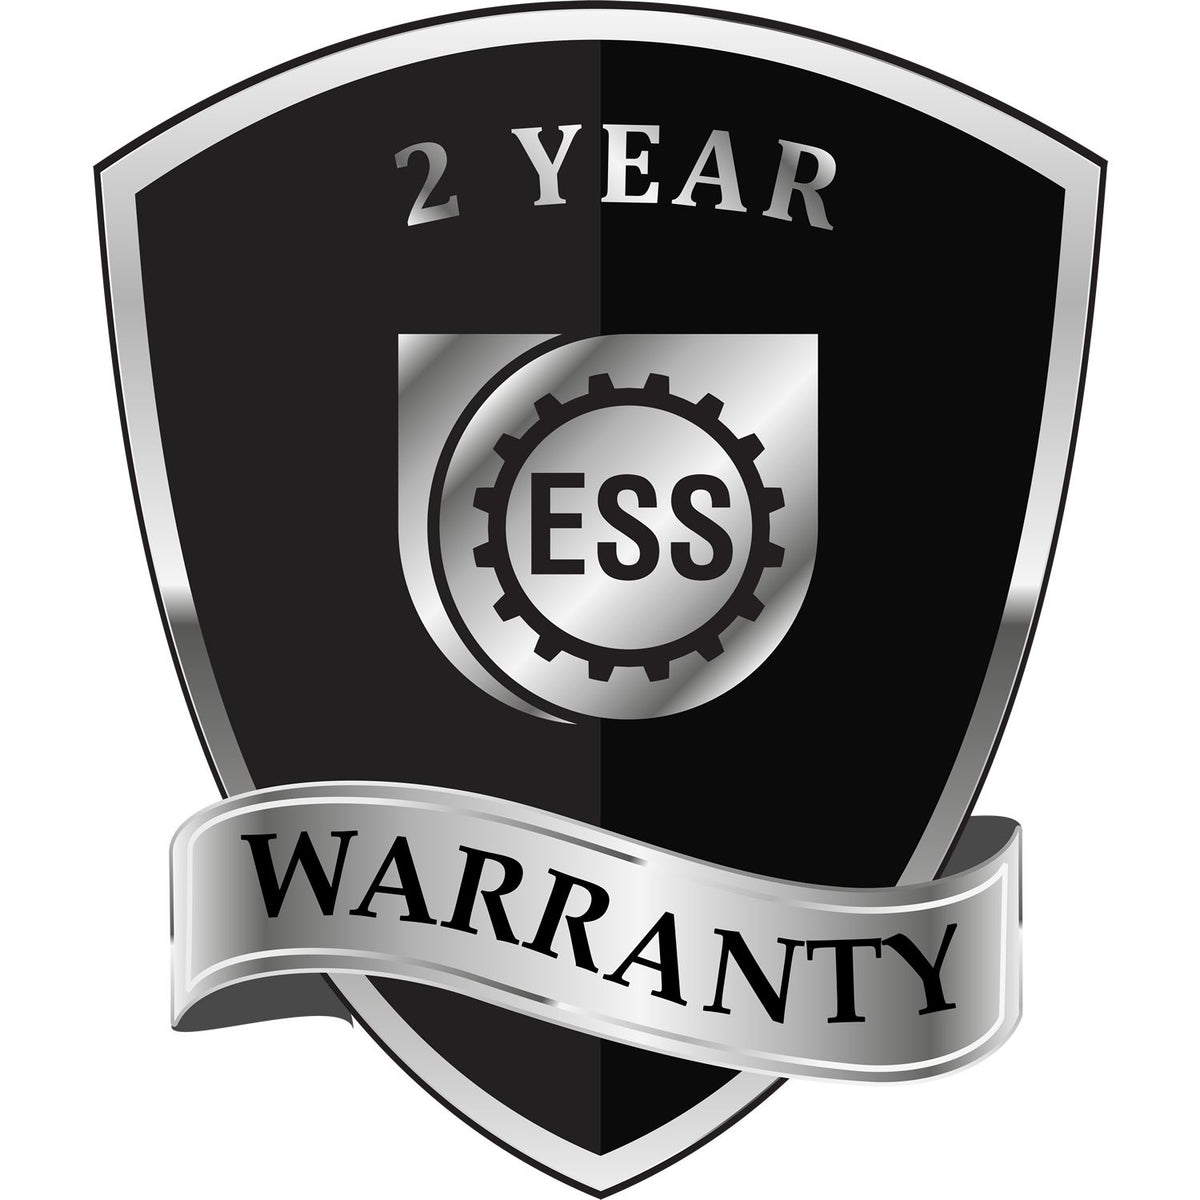 A badge or emblem showing a warranty icon for the Virginia Engineer Desk Seal